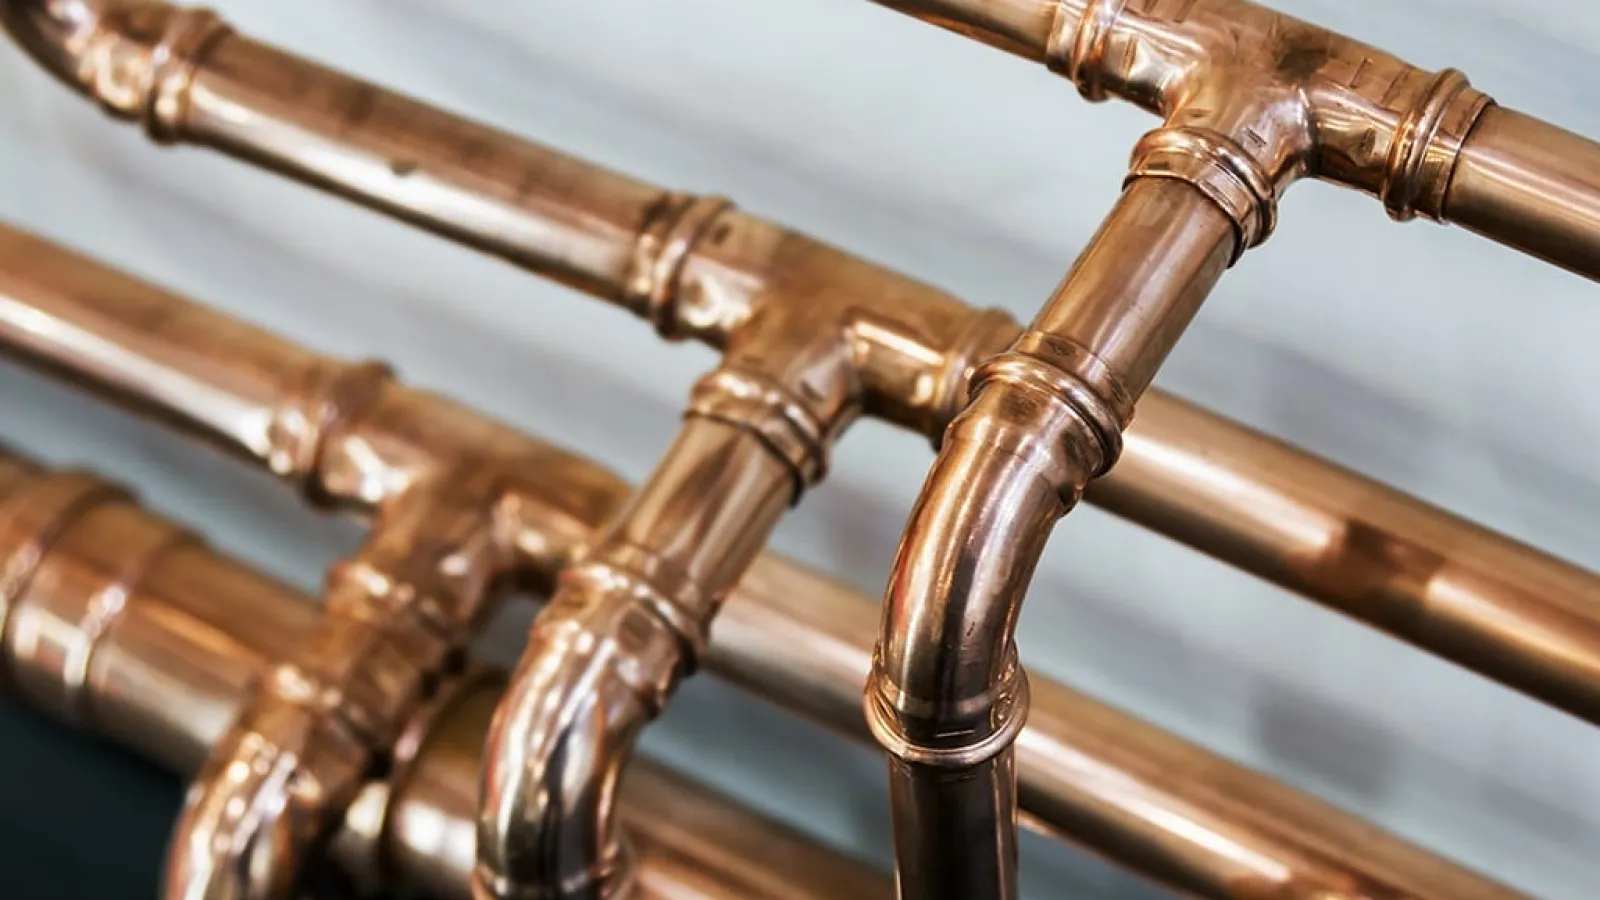 Plumbing Supply Question – Copper or Plastic Water Pipes?